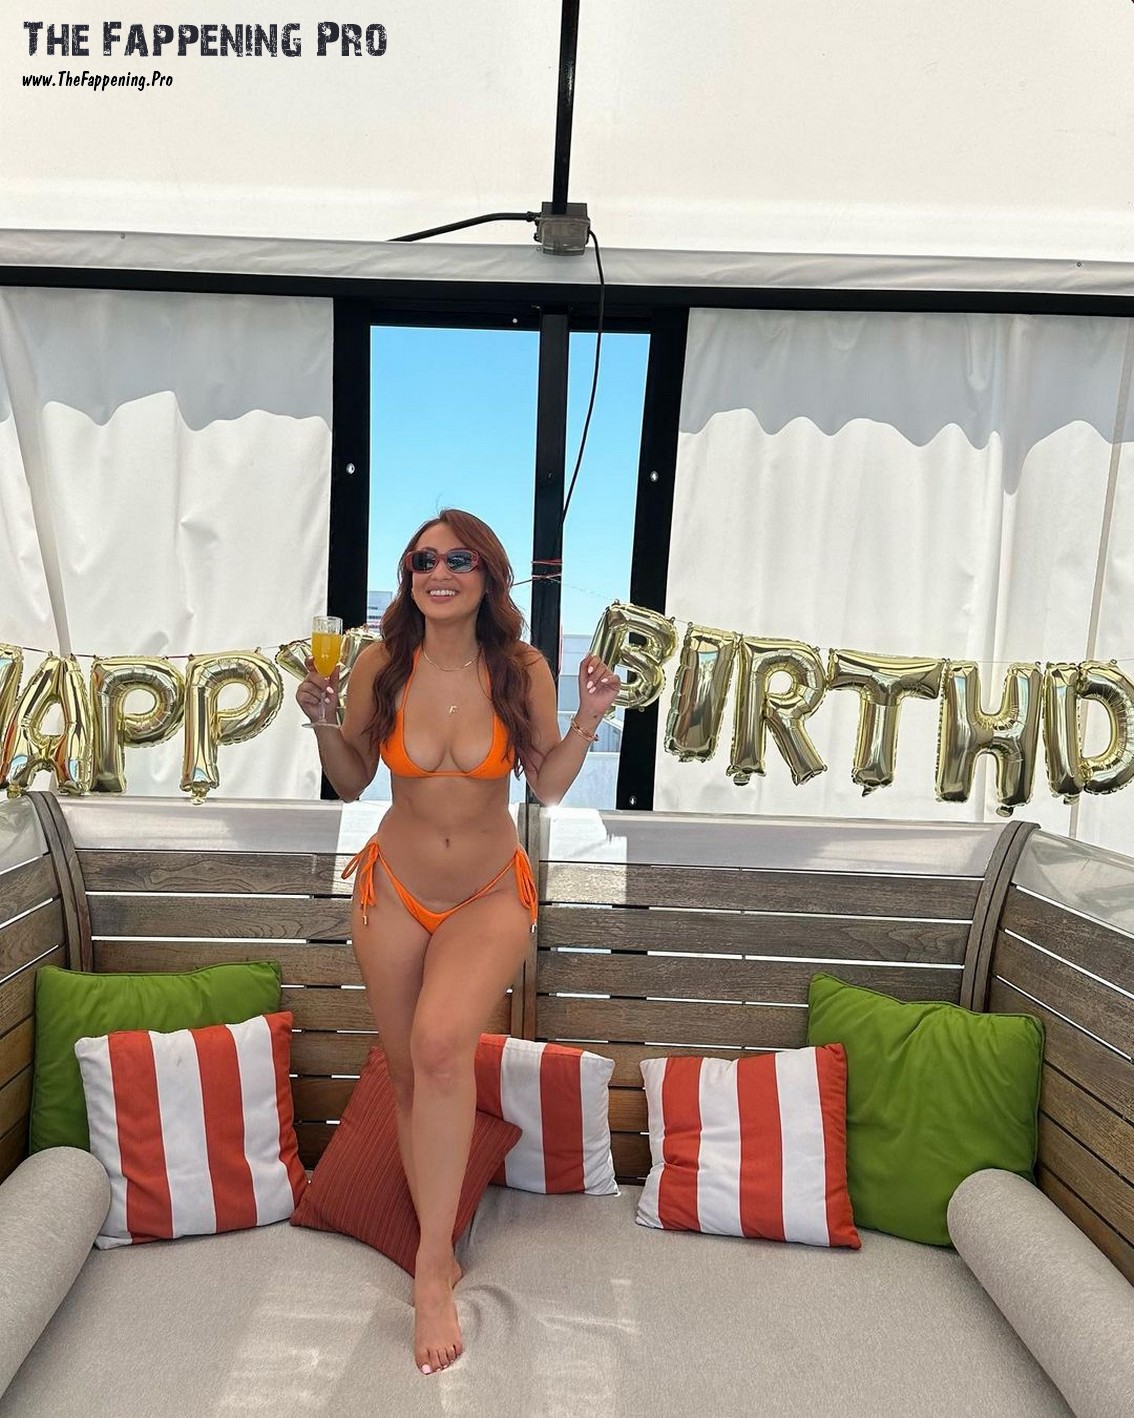 Actress Francia Raisa turned up the heat on her 35th birthday, flaunting her seductive curves in a tiny bikini. Known for her role in Bring It On: All or Nothing, she now stars as Valentina in How I Met Your Father. Check out the sizzling photos from her celebration!